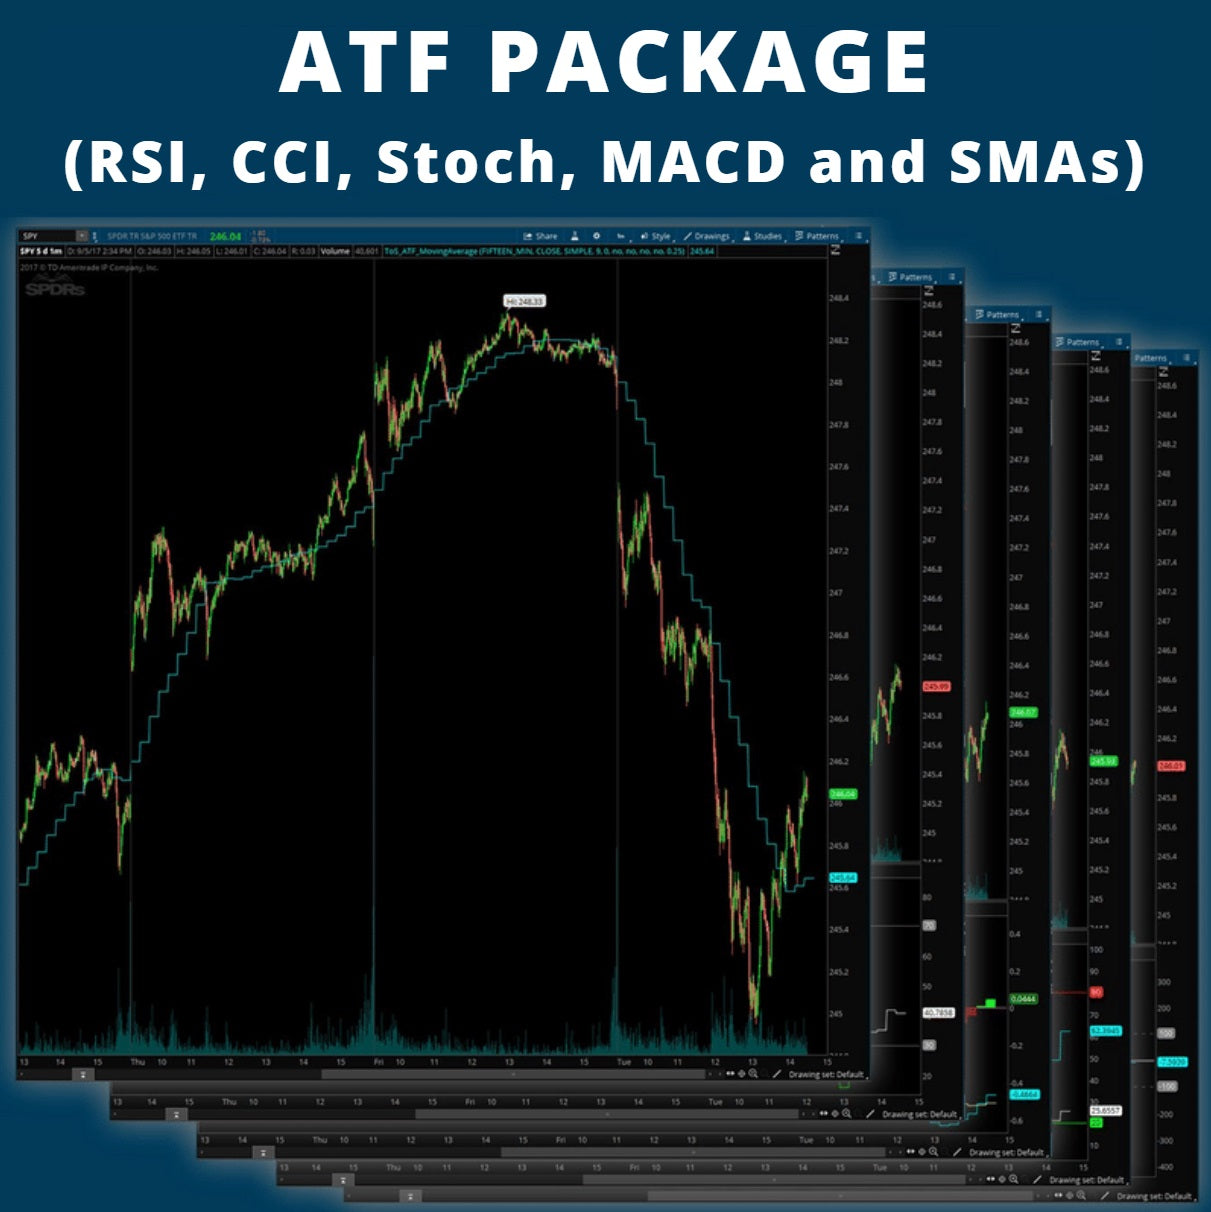 ATF Package (RSI, CCI, Stoch, MACD and MAs)